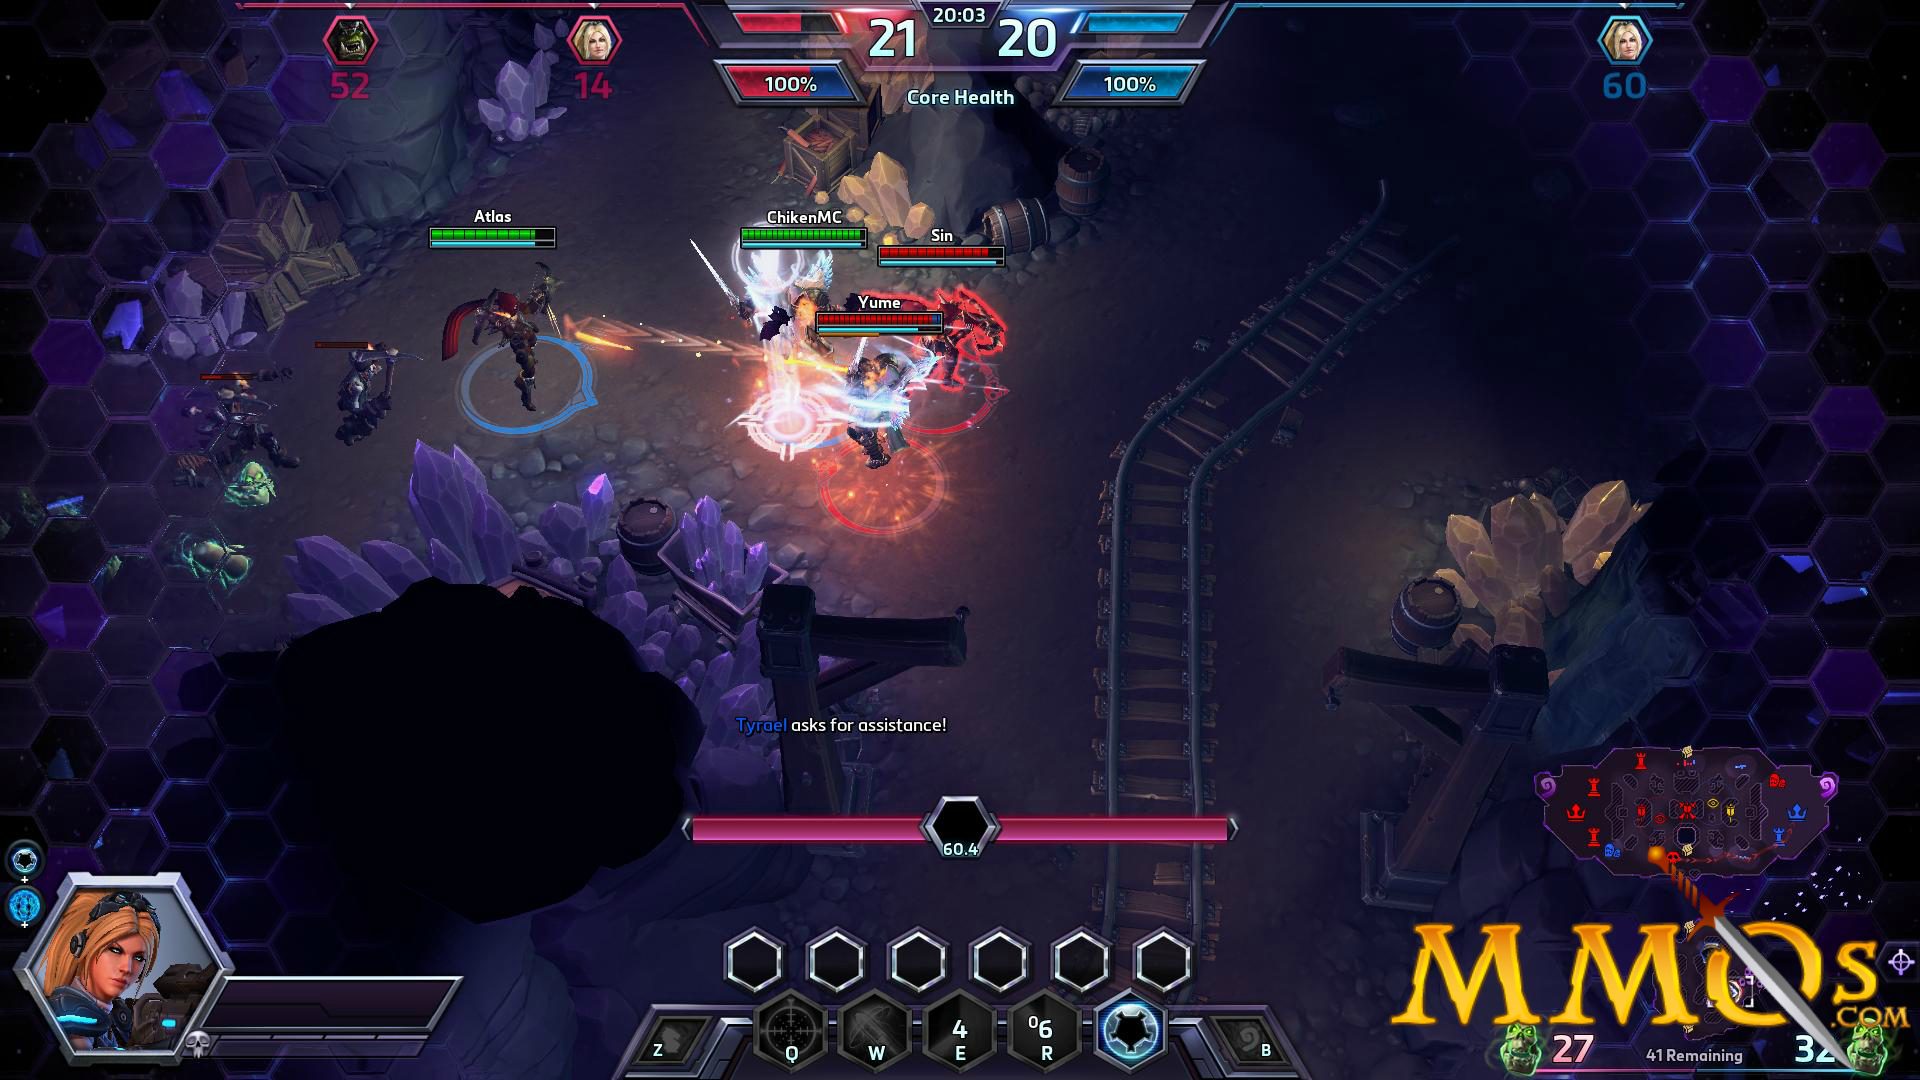 Heroes of the Storm review